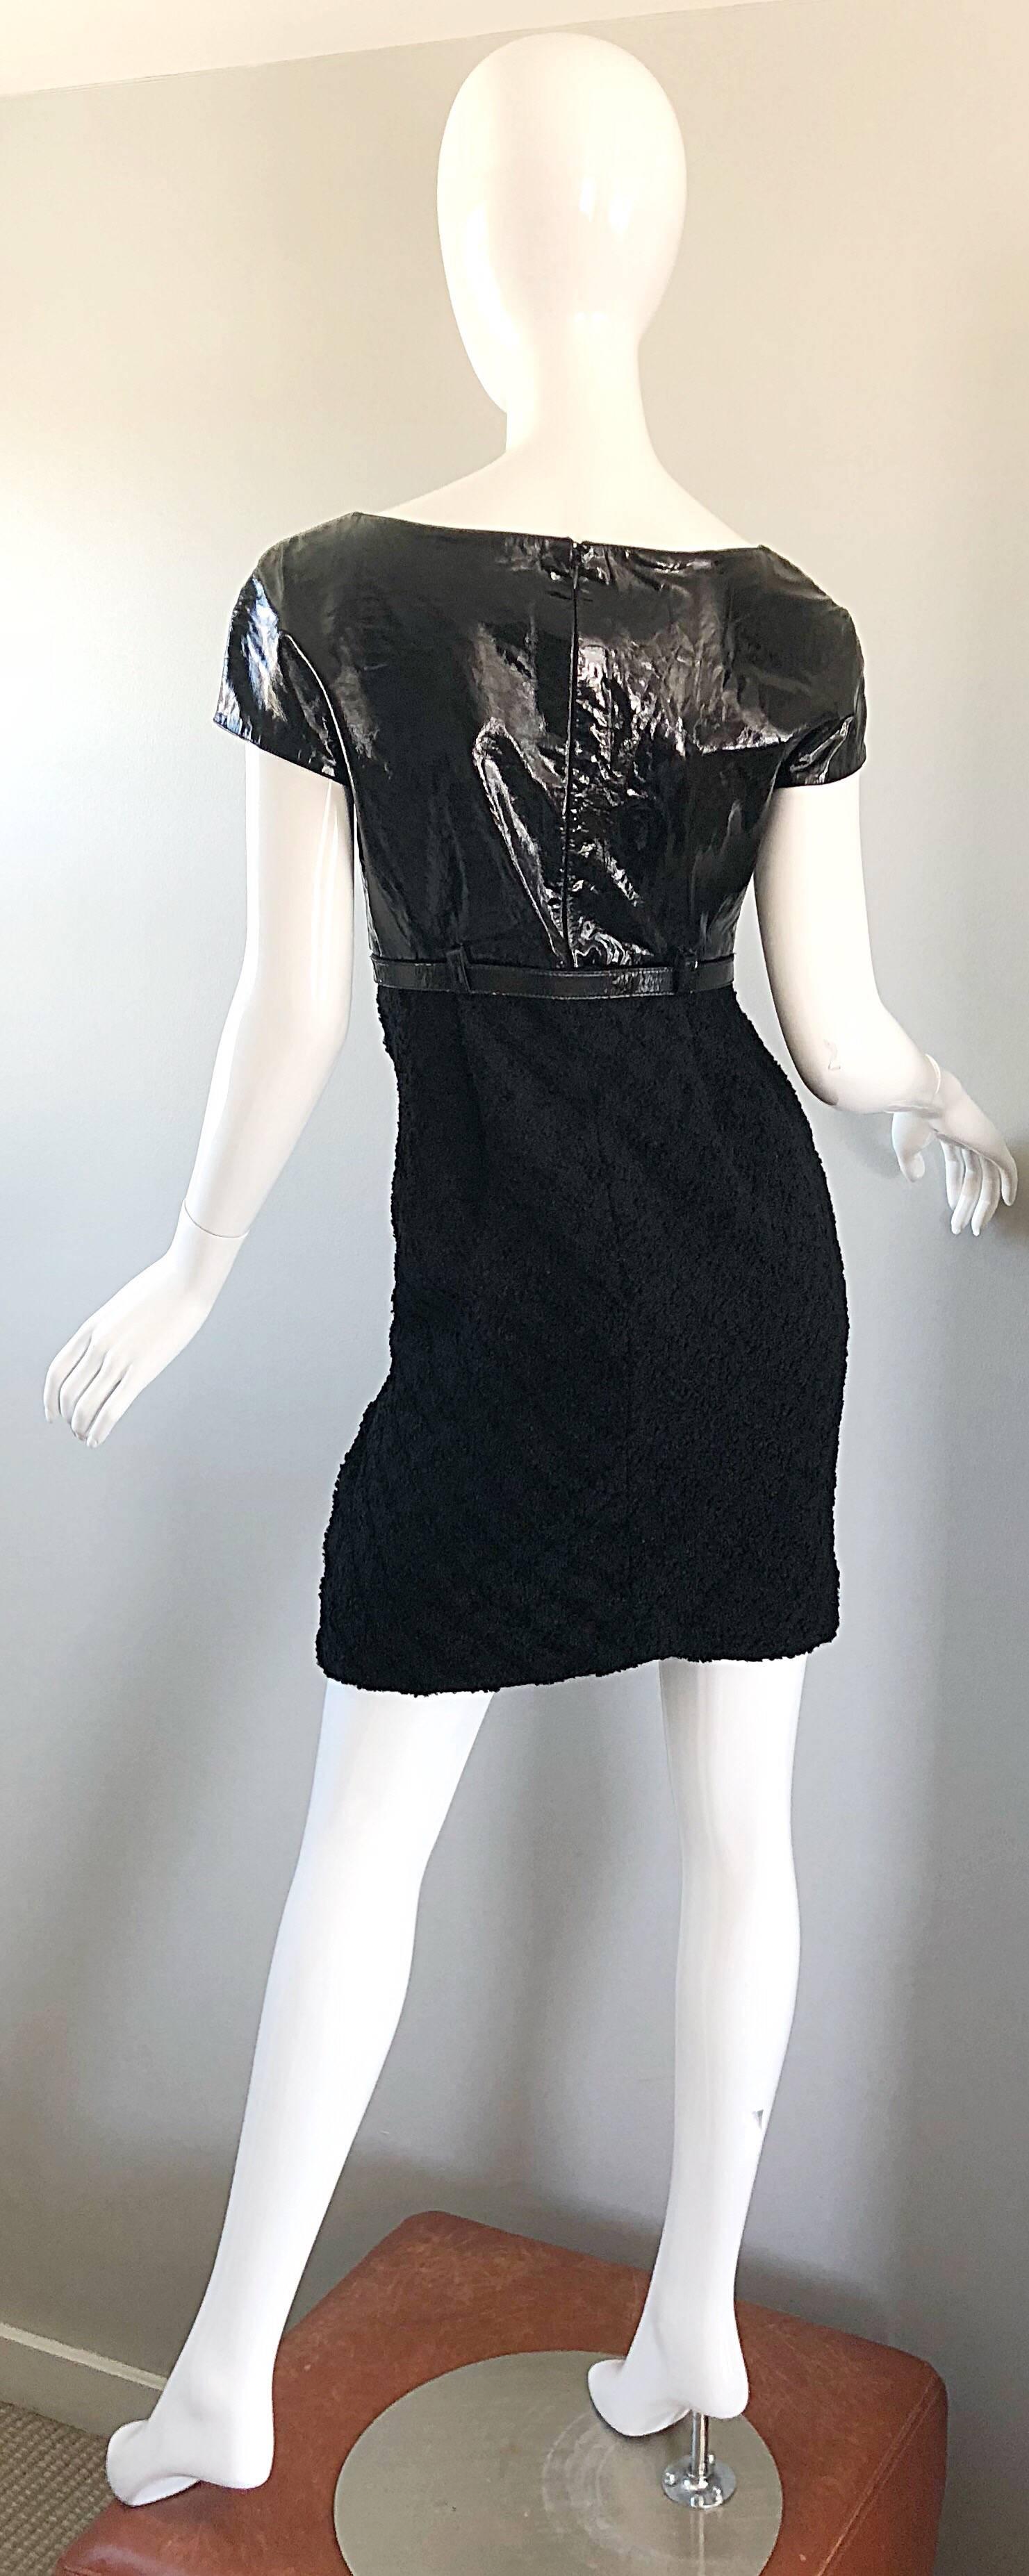 Women's Documented Gianni Versace Couture Vintage F/W 1994 Black PVC Wool 90s Dress For Sale